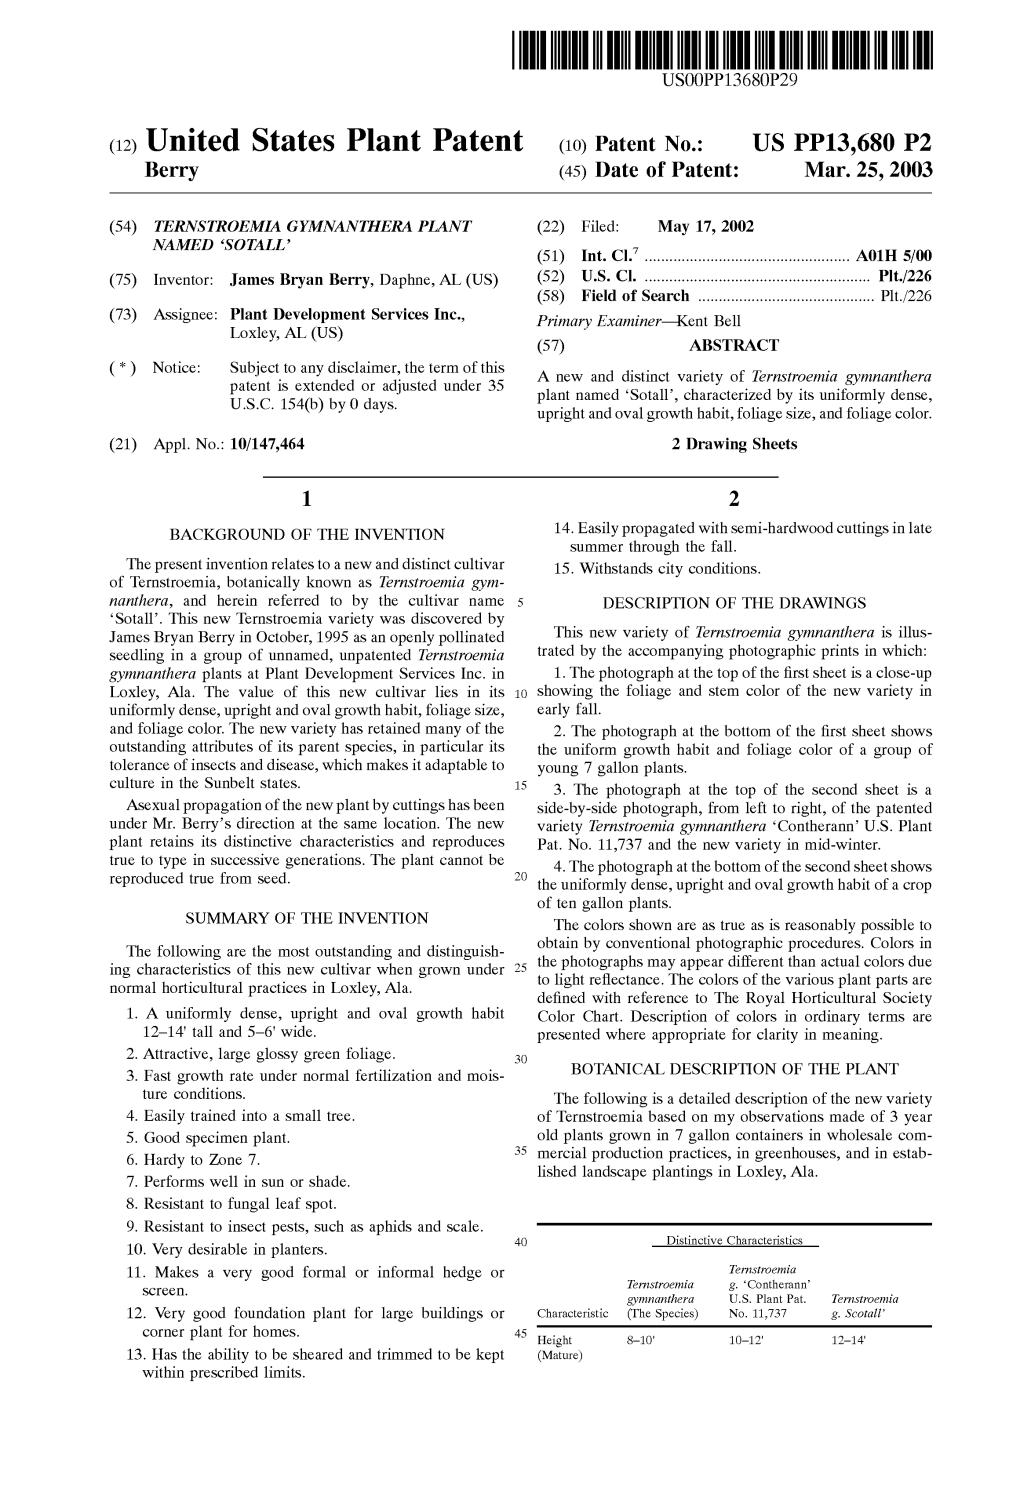 (12) United States Plant Patent (10) Patent No.: US PP13,680 P2 Berry (45) Date of Patent: Mar